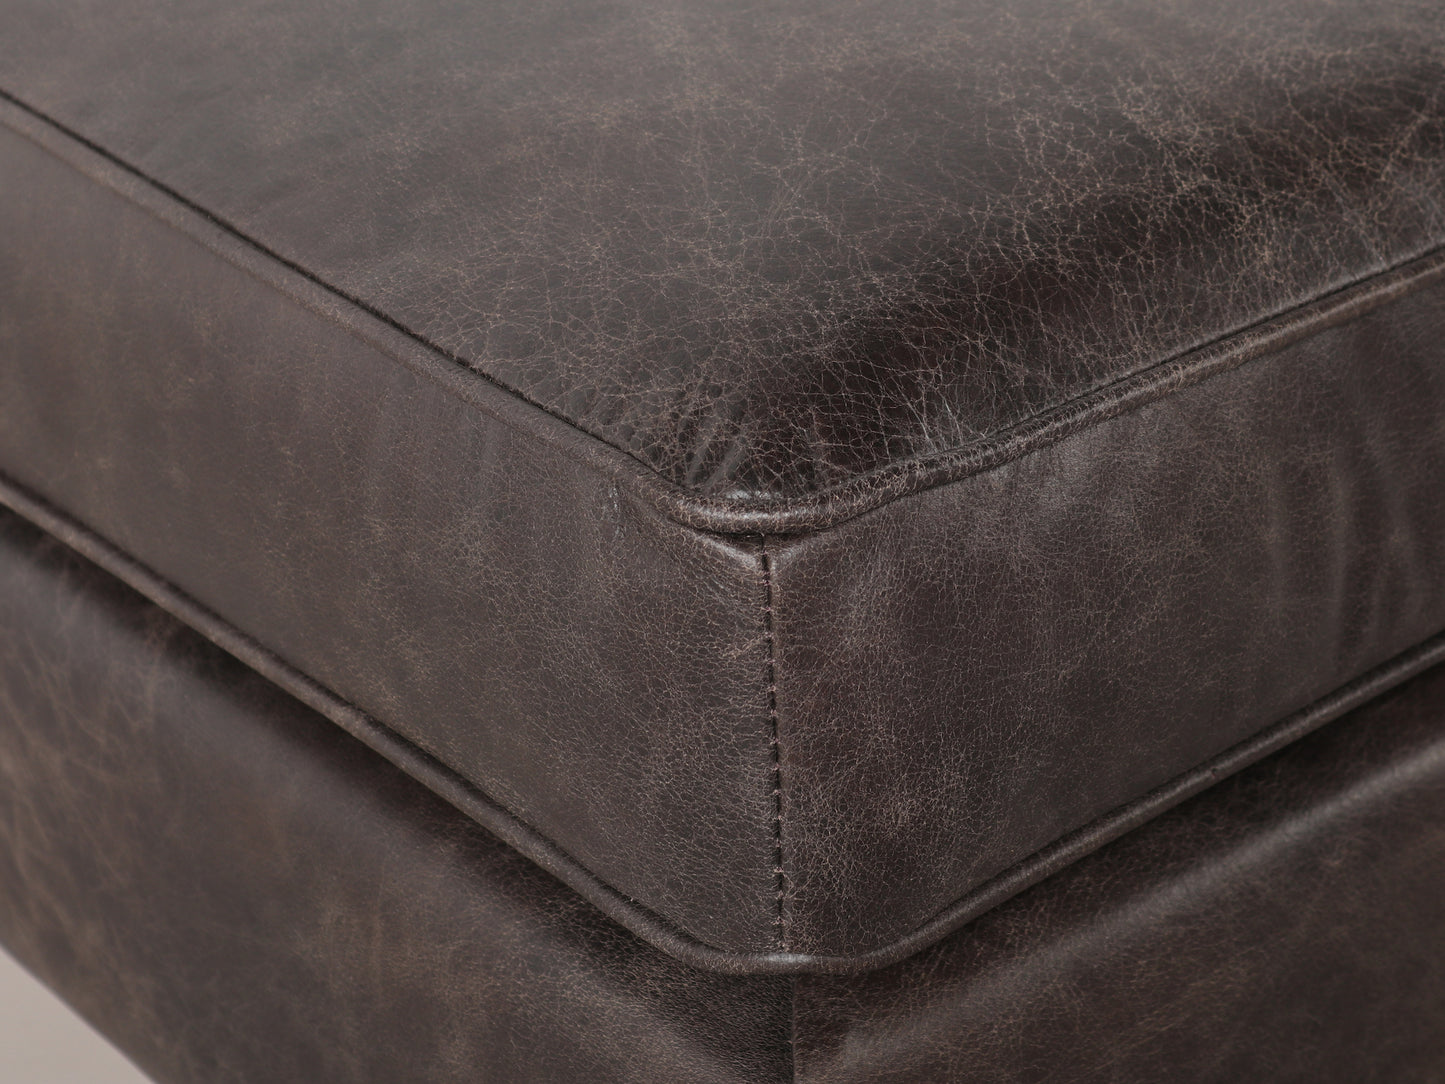 Double Leather Ottoman | Morocco